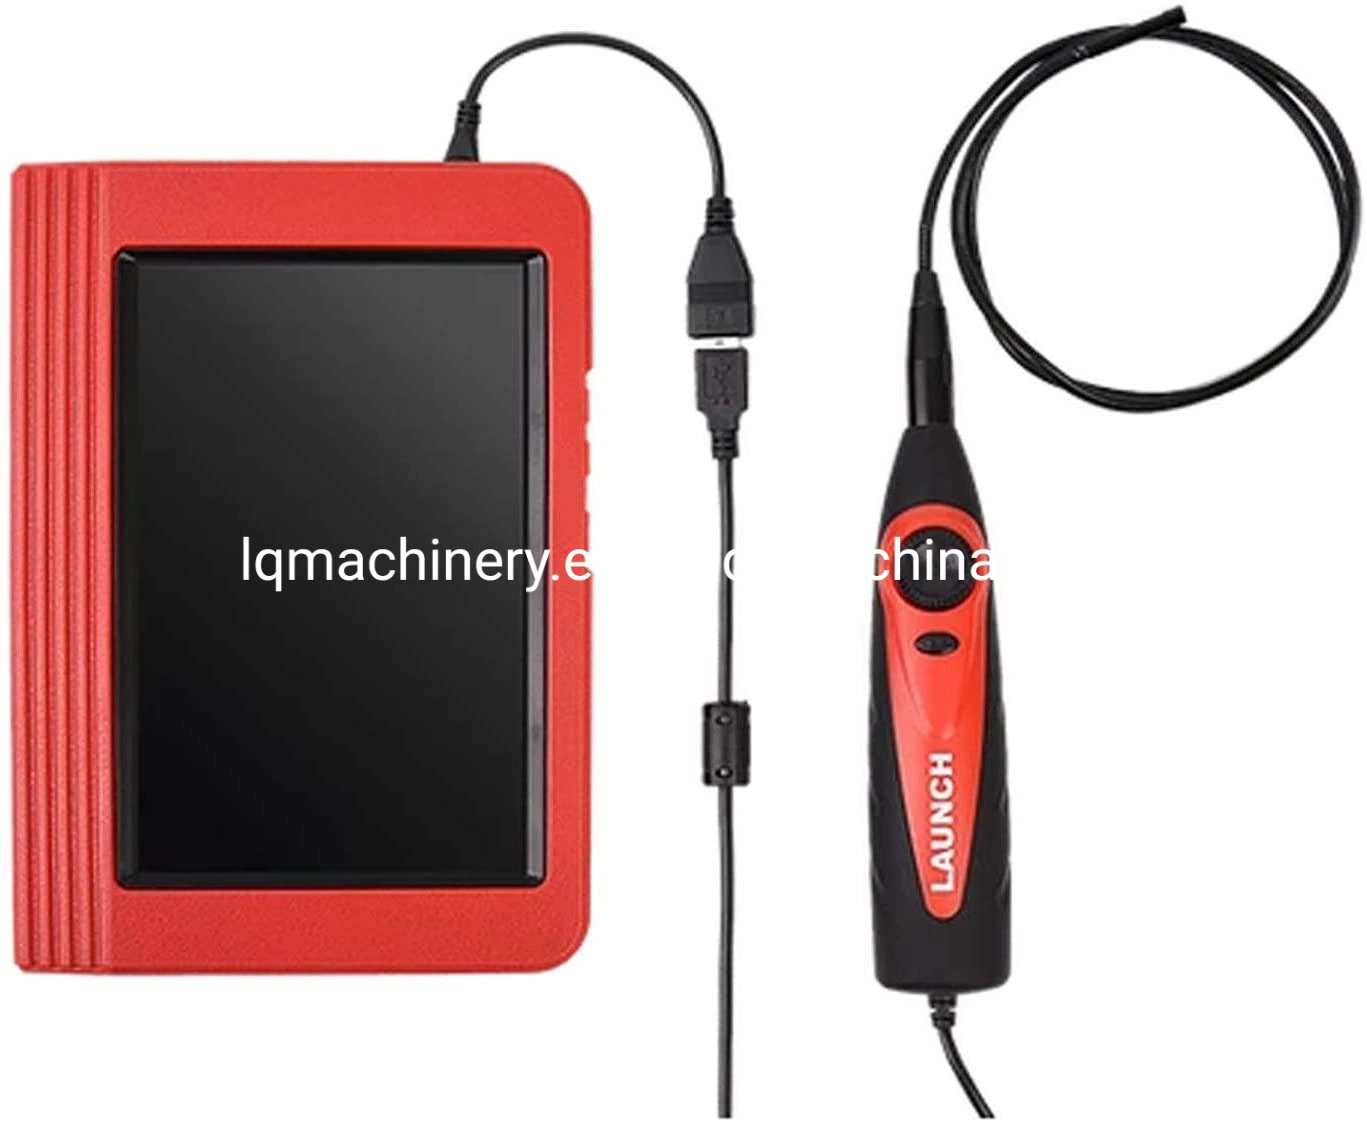 Adjustable LED Lights Launch Videoscope Borescope Inspection Camera Work with Launch X431 and Android Devices